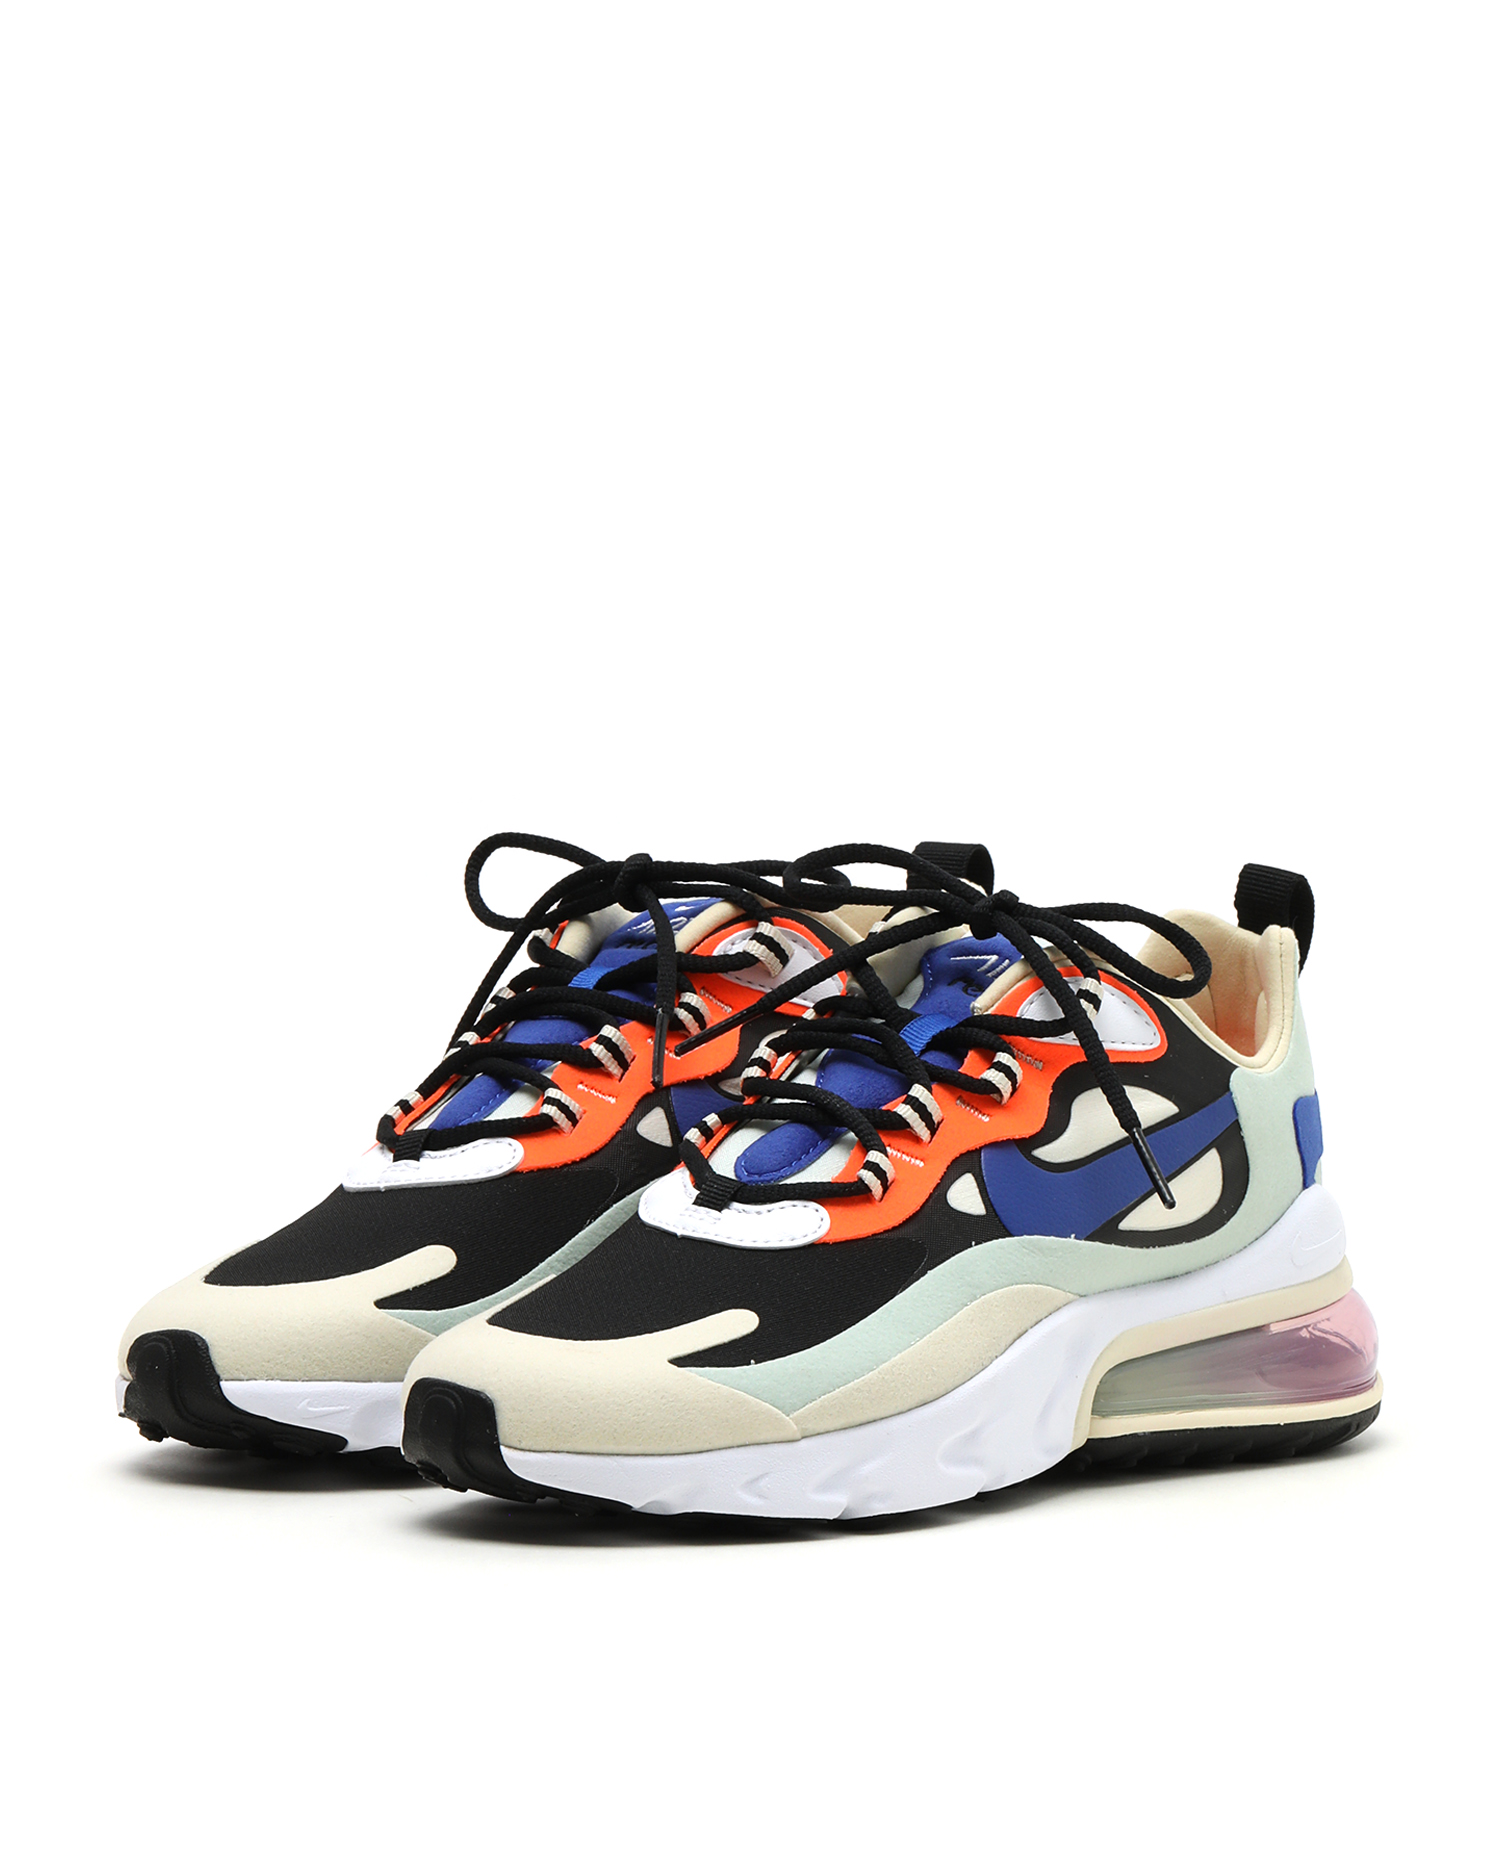 nike air max 270 offers